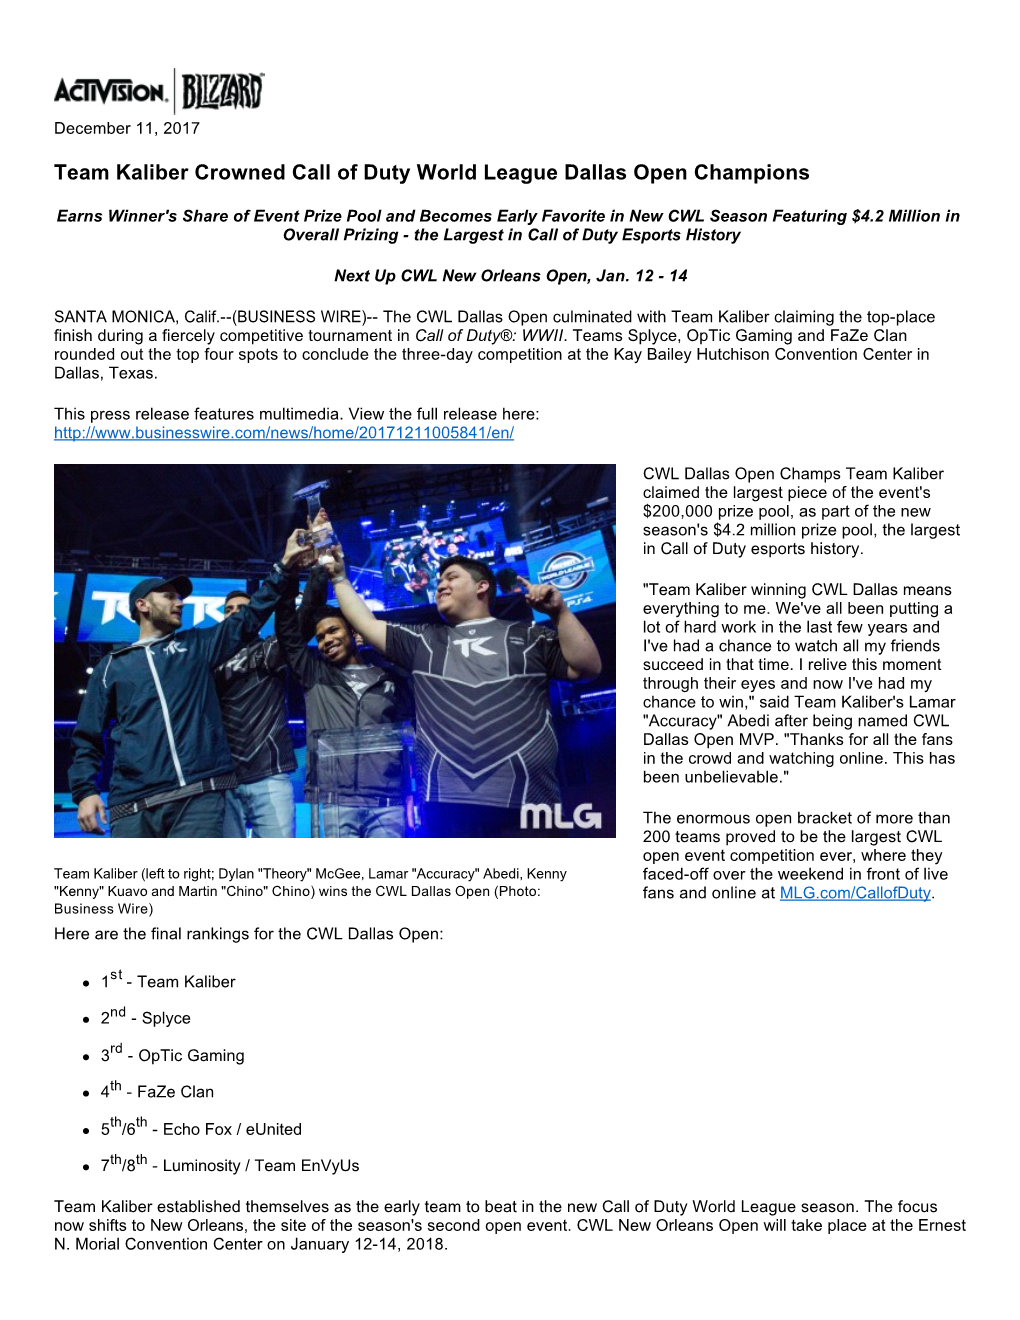 Team Kaliber Crowned Call of Duty World League Dallas Open Champions